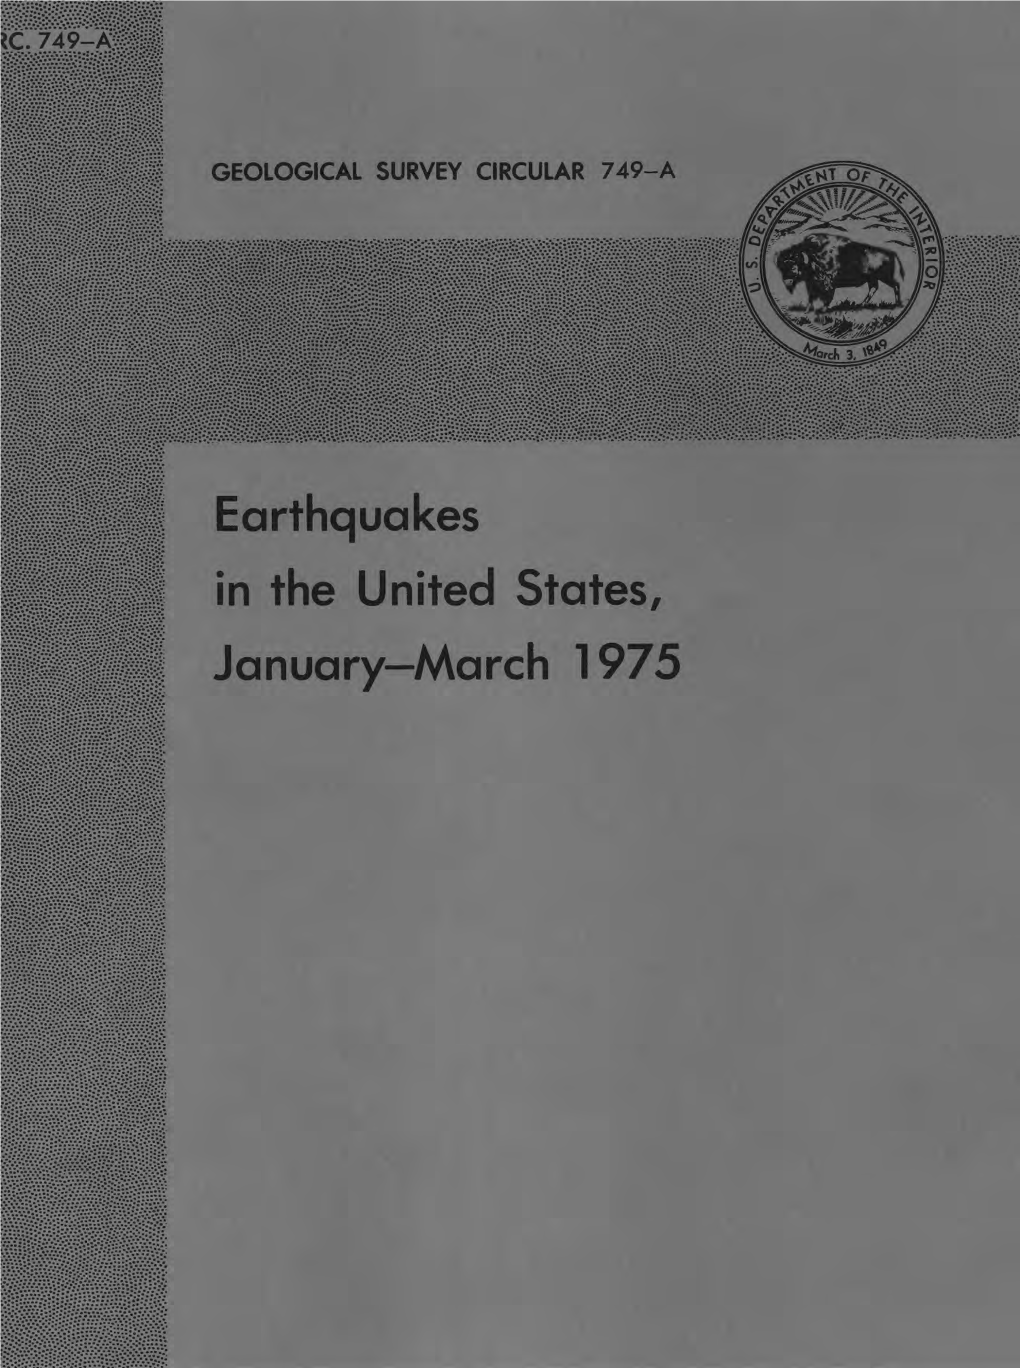 Earthquakes in the United States, January March 1975 Earthquakes in the United States, January March 1975